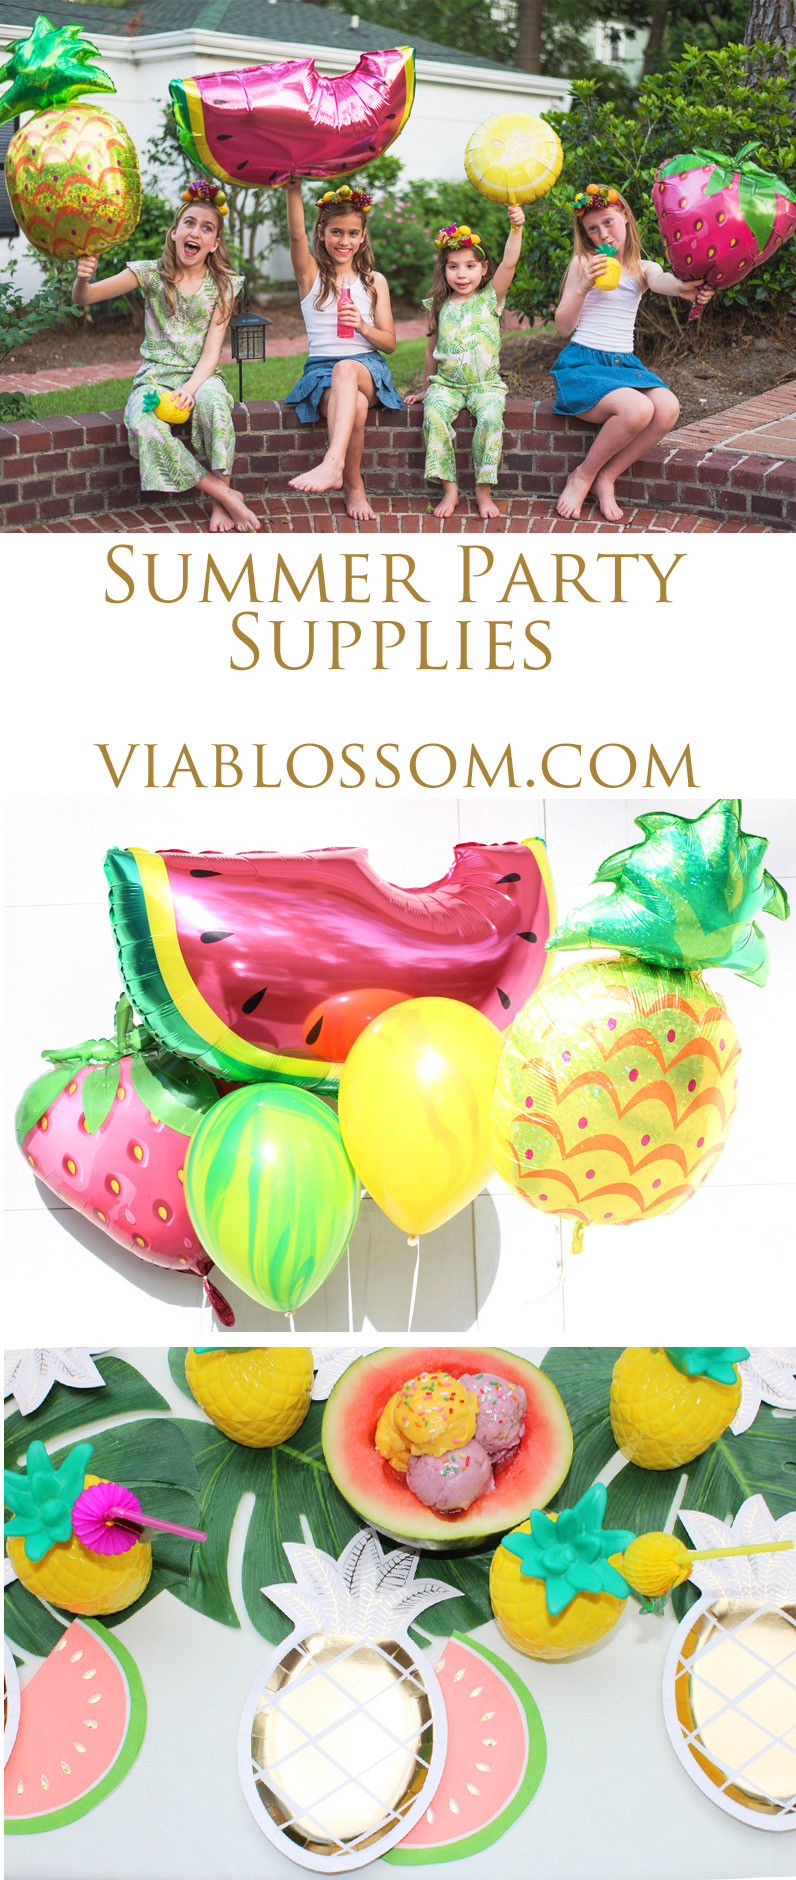 Summer Party Favors
 Must Have Summer Party Supplies Via Blossom